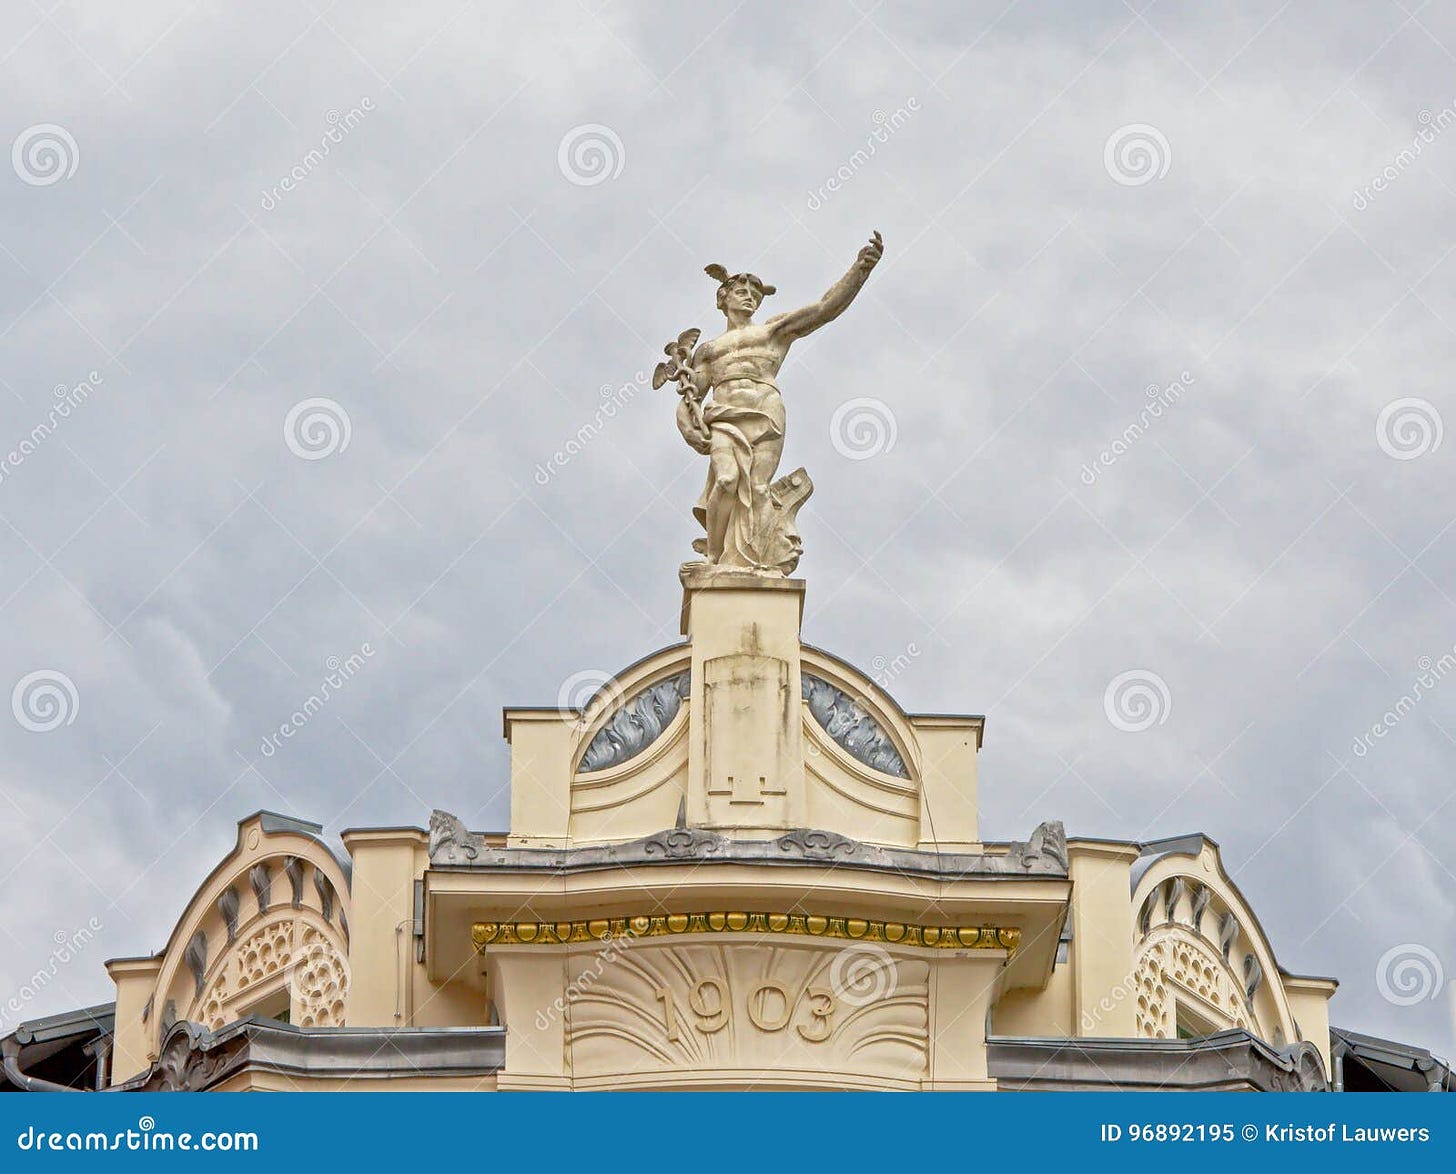 Statue of the Greek God Hermes on Top of a Renaissance Revival Building in  Ljubljana, Slovenia Stock Image - Image of mercury, historical: 96892195